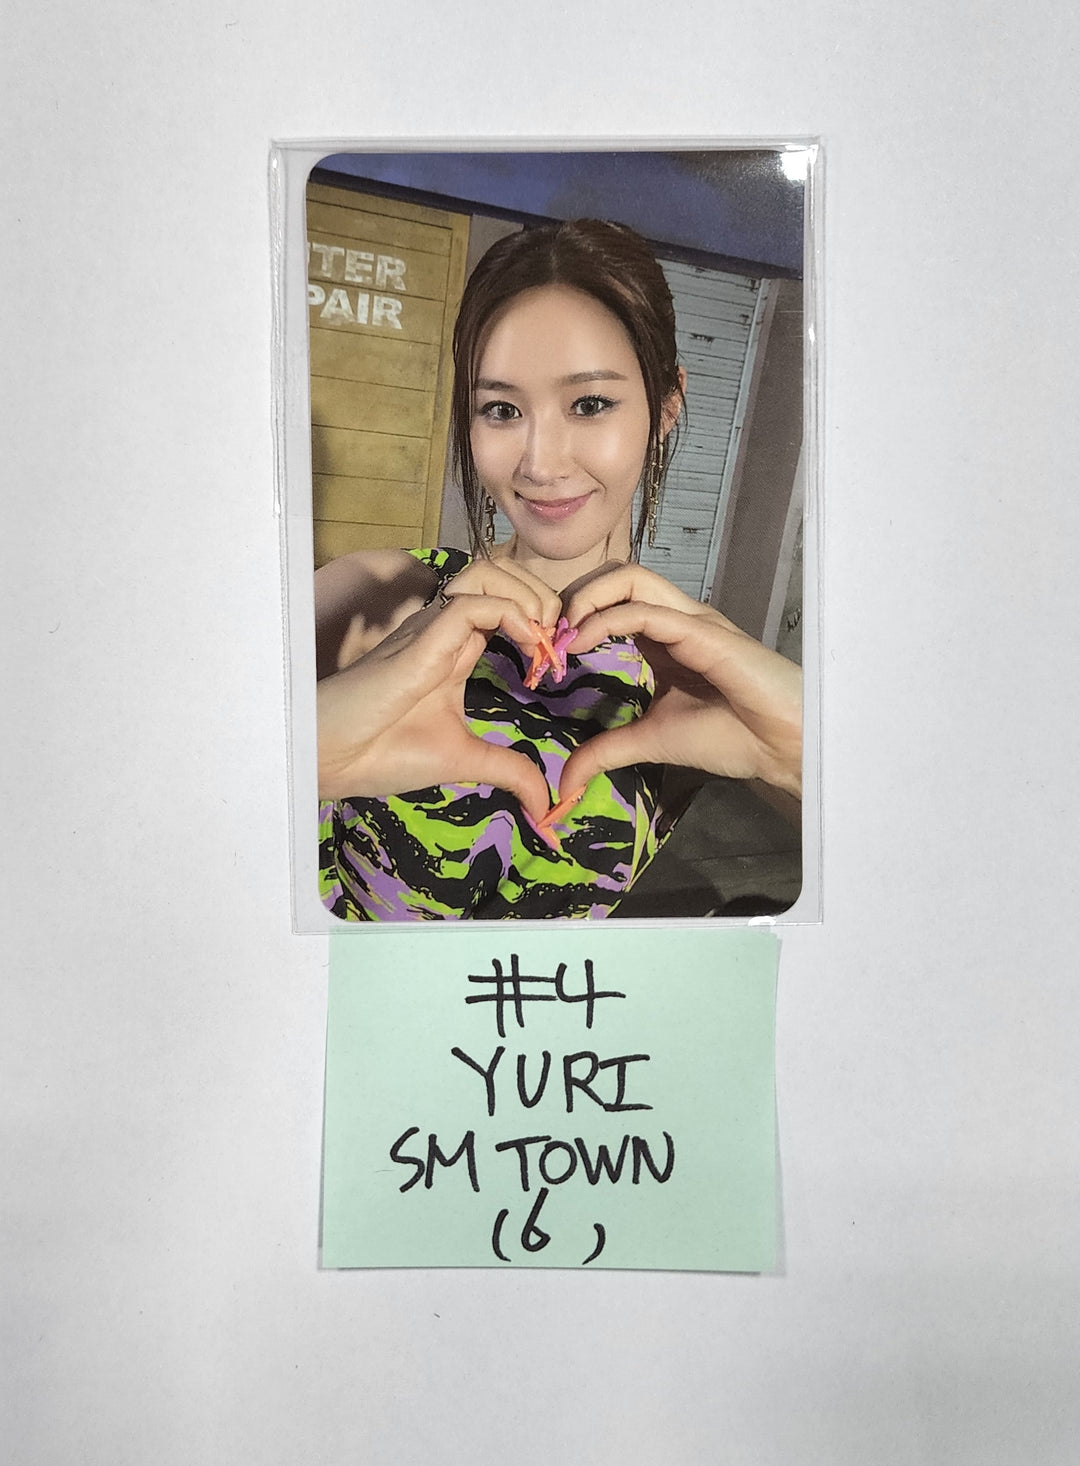 Girl's Generation (SNSD) 'Forever 1' - SMTOWN Fansign Event Photocard